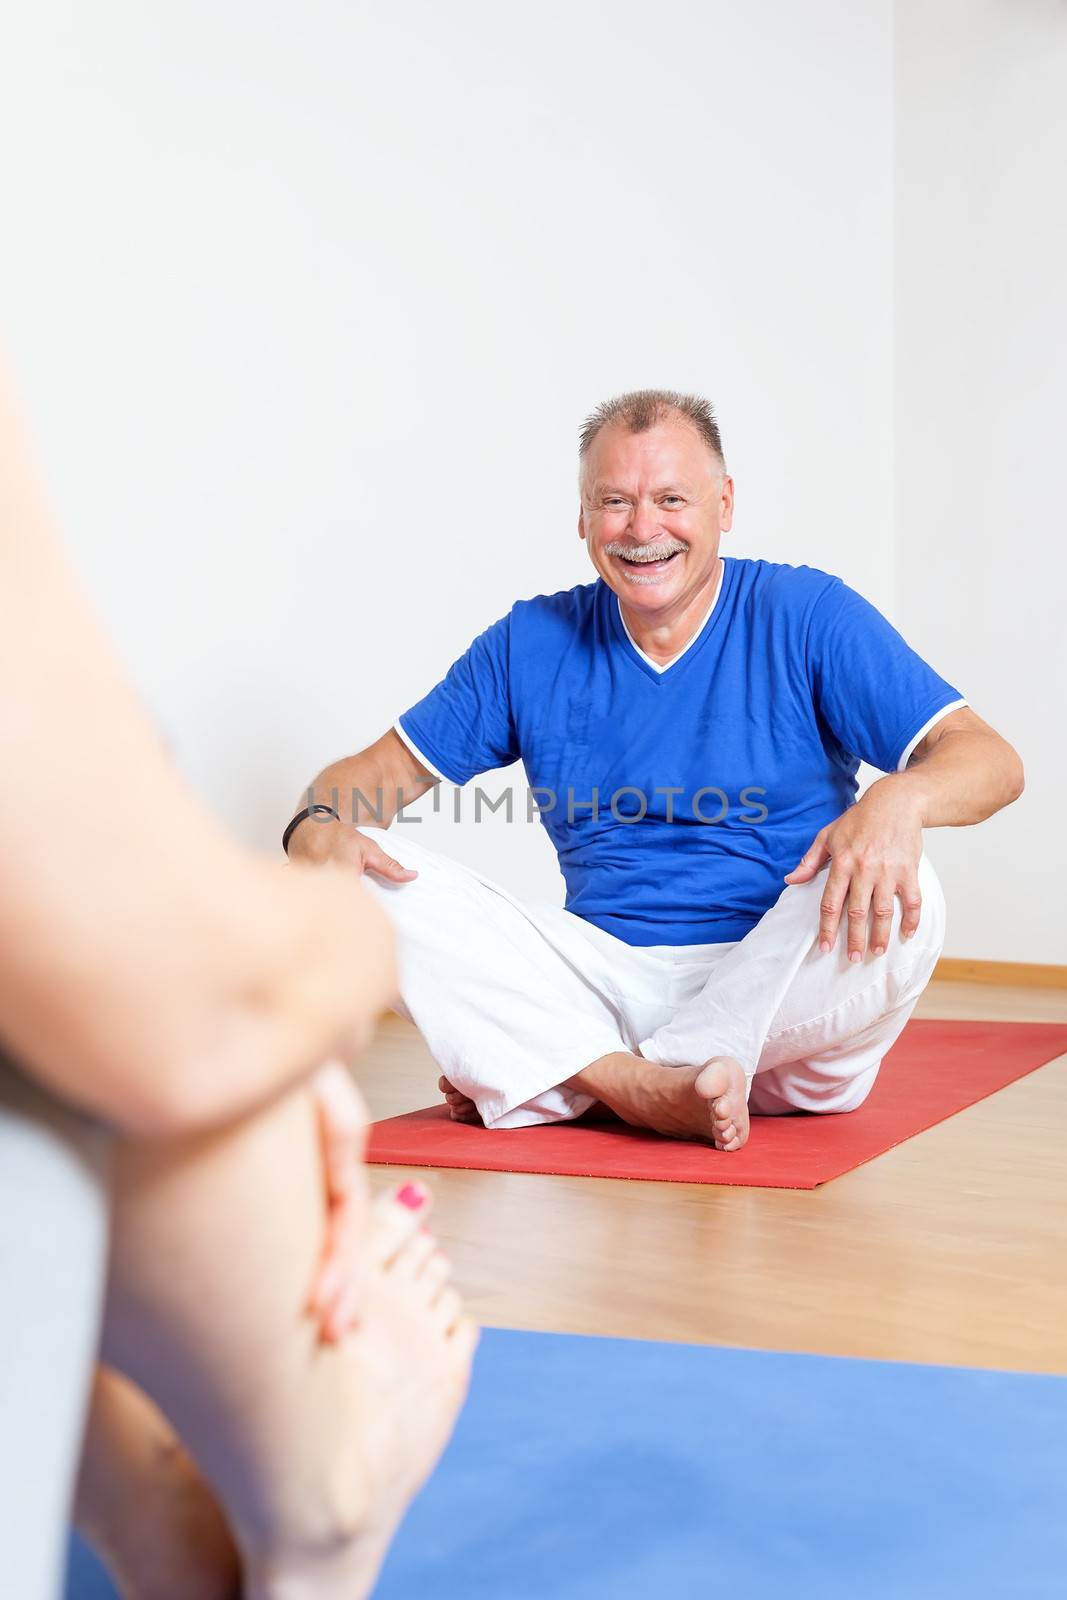 An image of a man doing yoga exercises